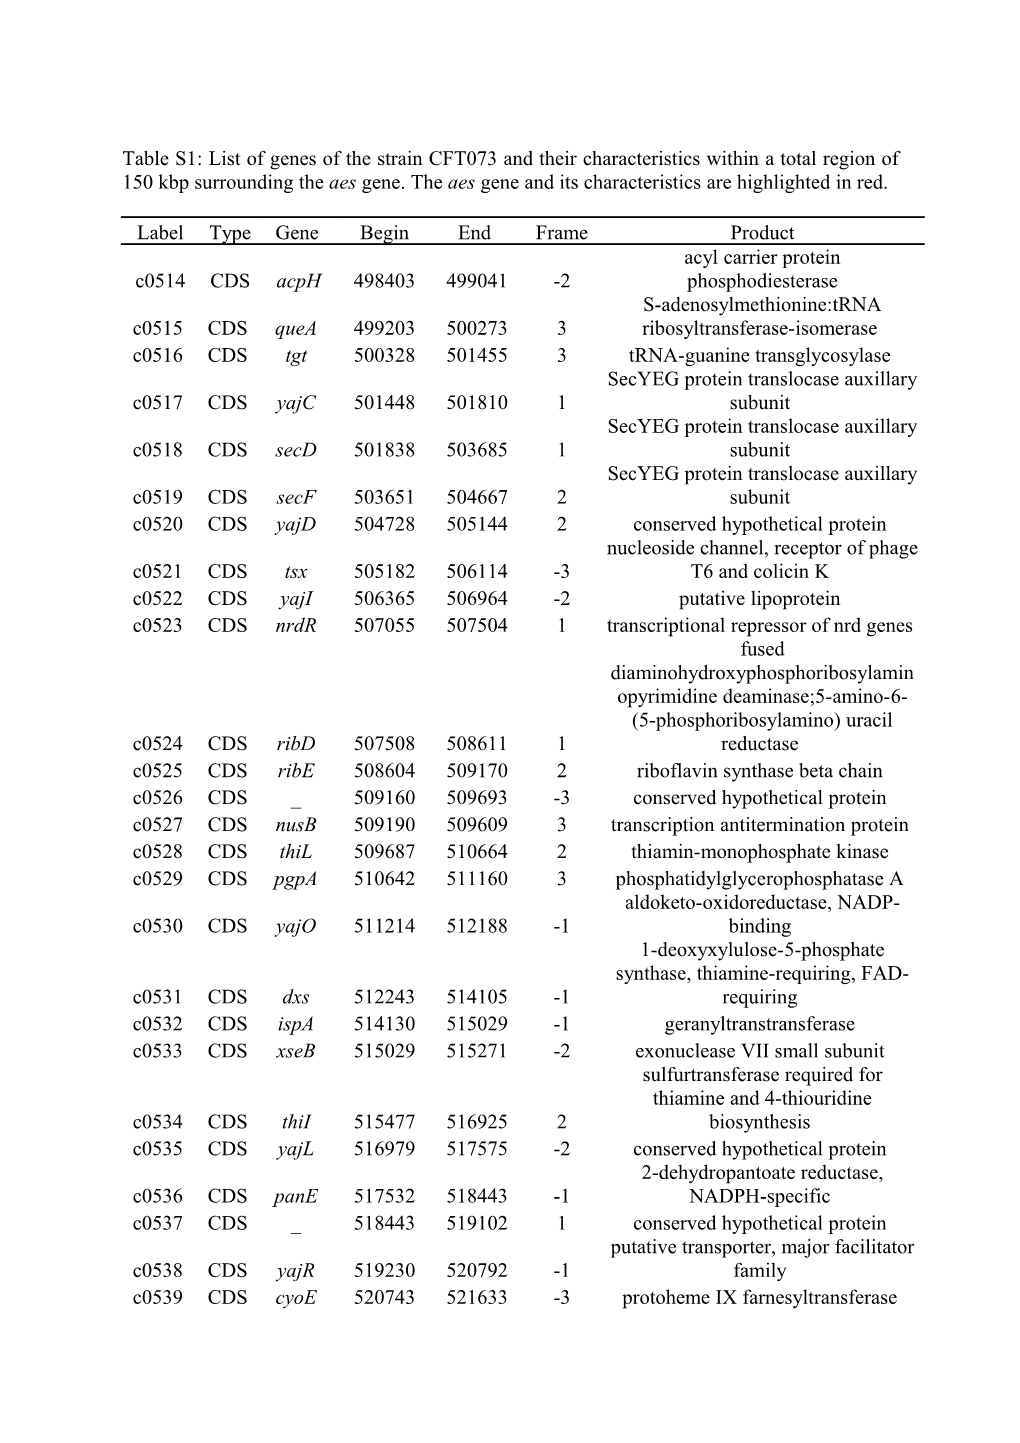 Table S1: Different Parsimonious Models, and Their Estimated Parameters, Selected by The